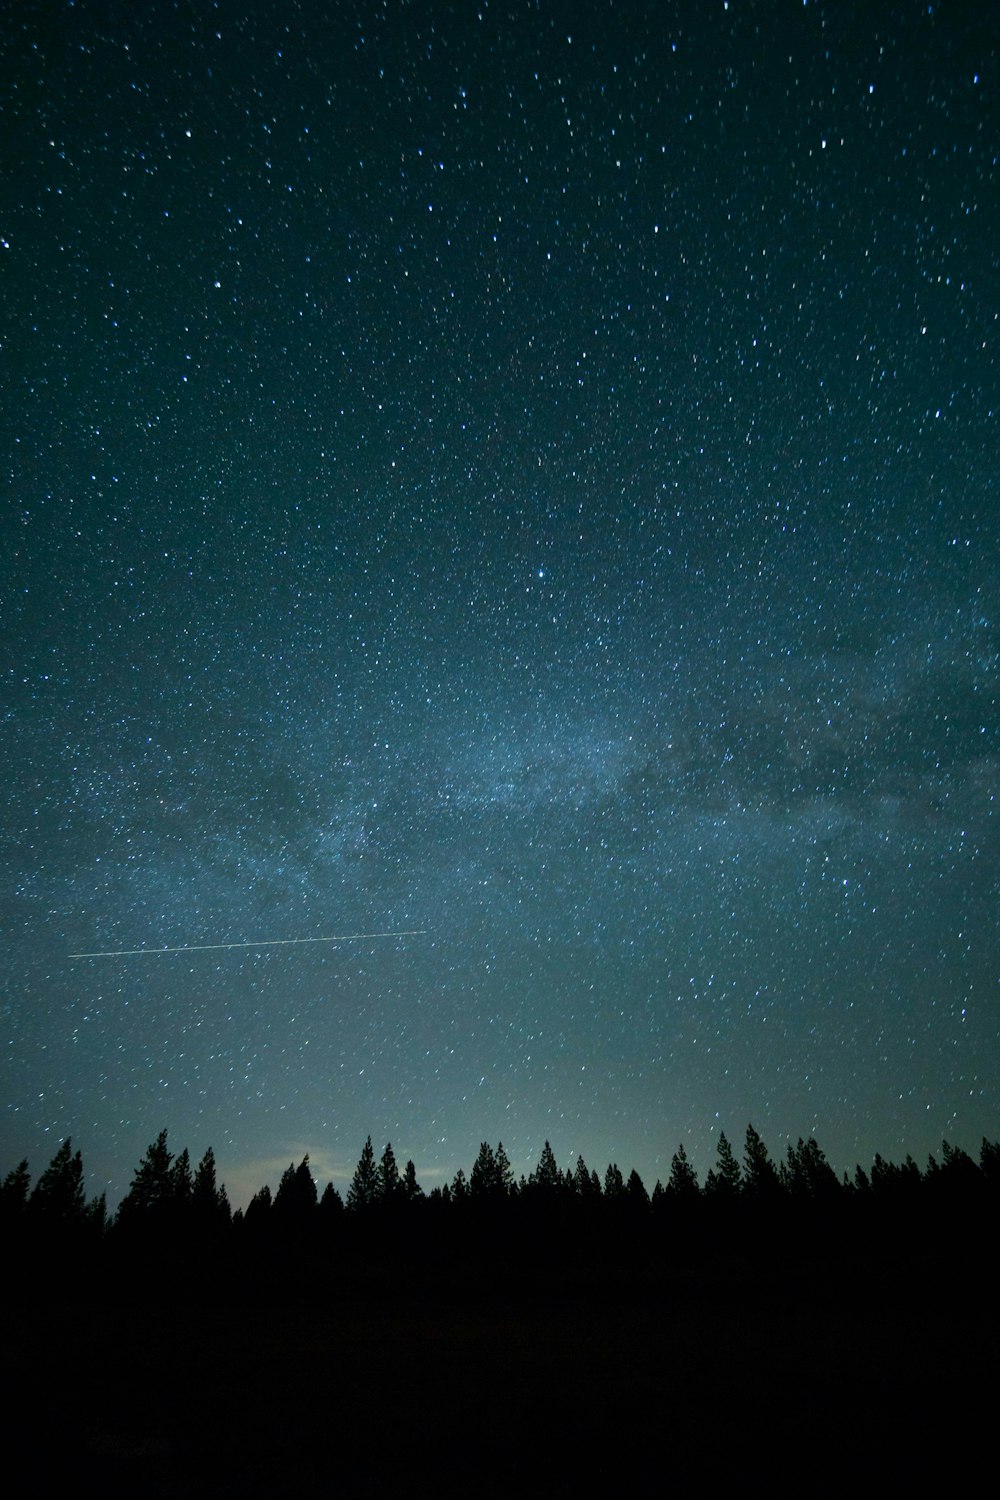 100+ Night Sky Pictures | Download Free Images & Stock Photos on Unsplash